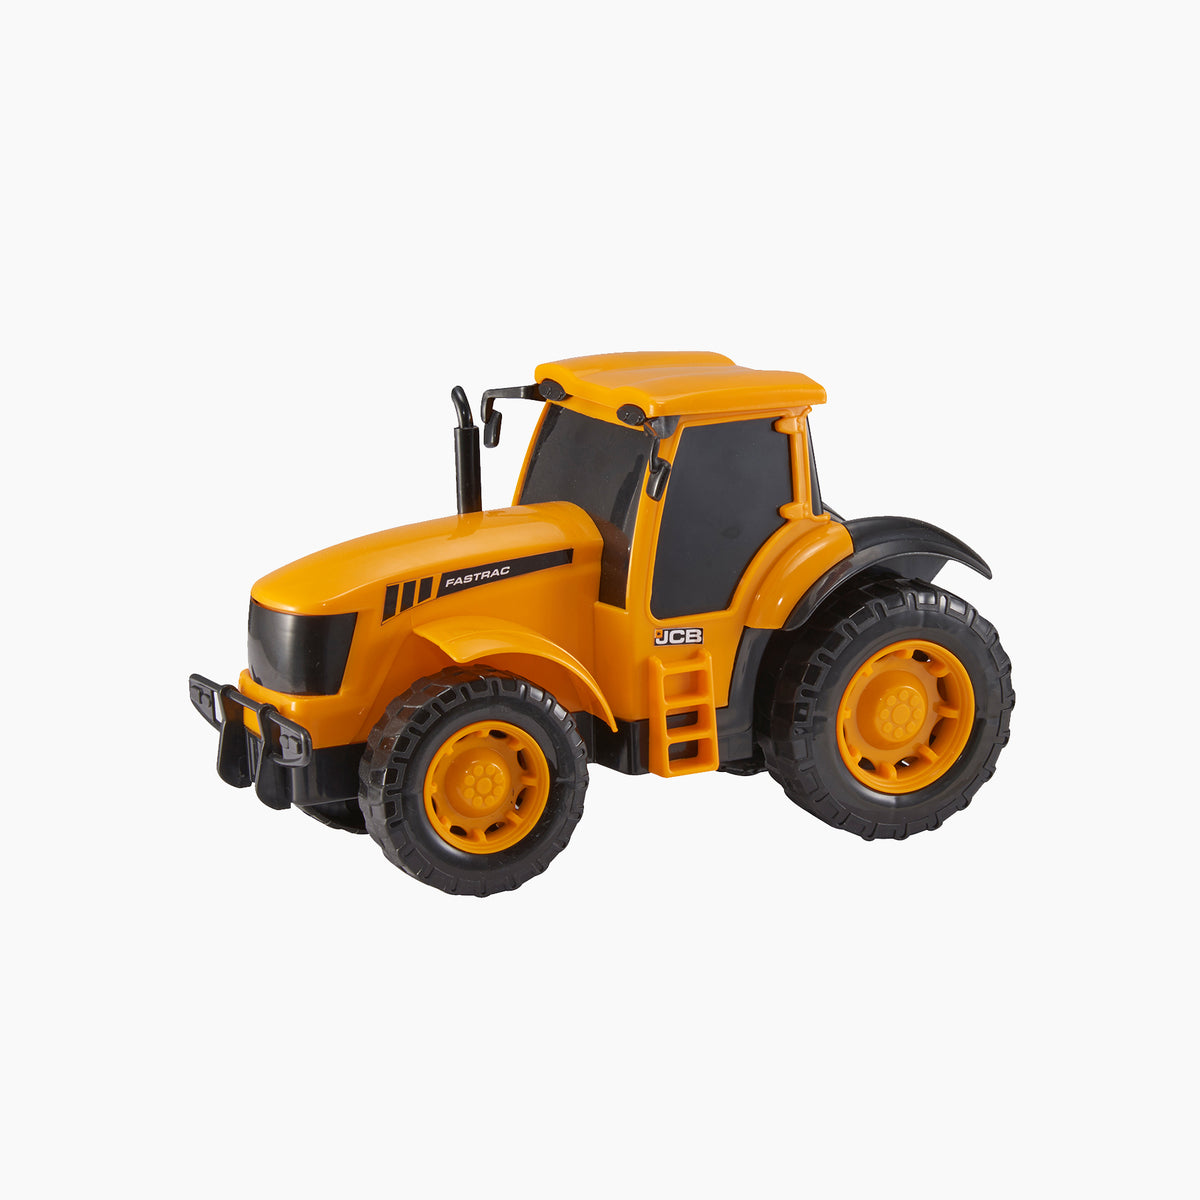 image of the JCB Heavy Loader Transporter from Teamsterz HTI